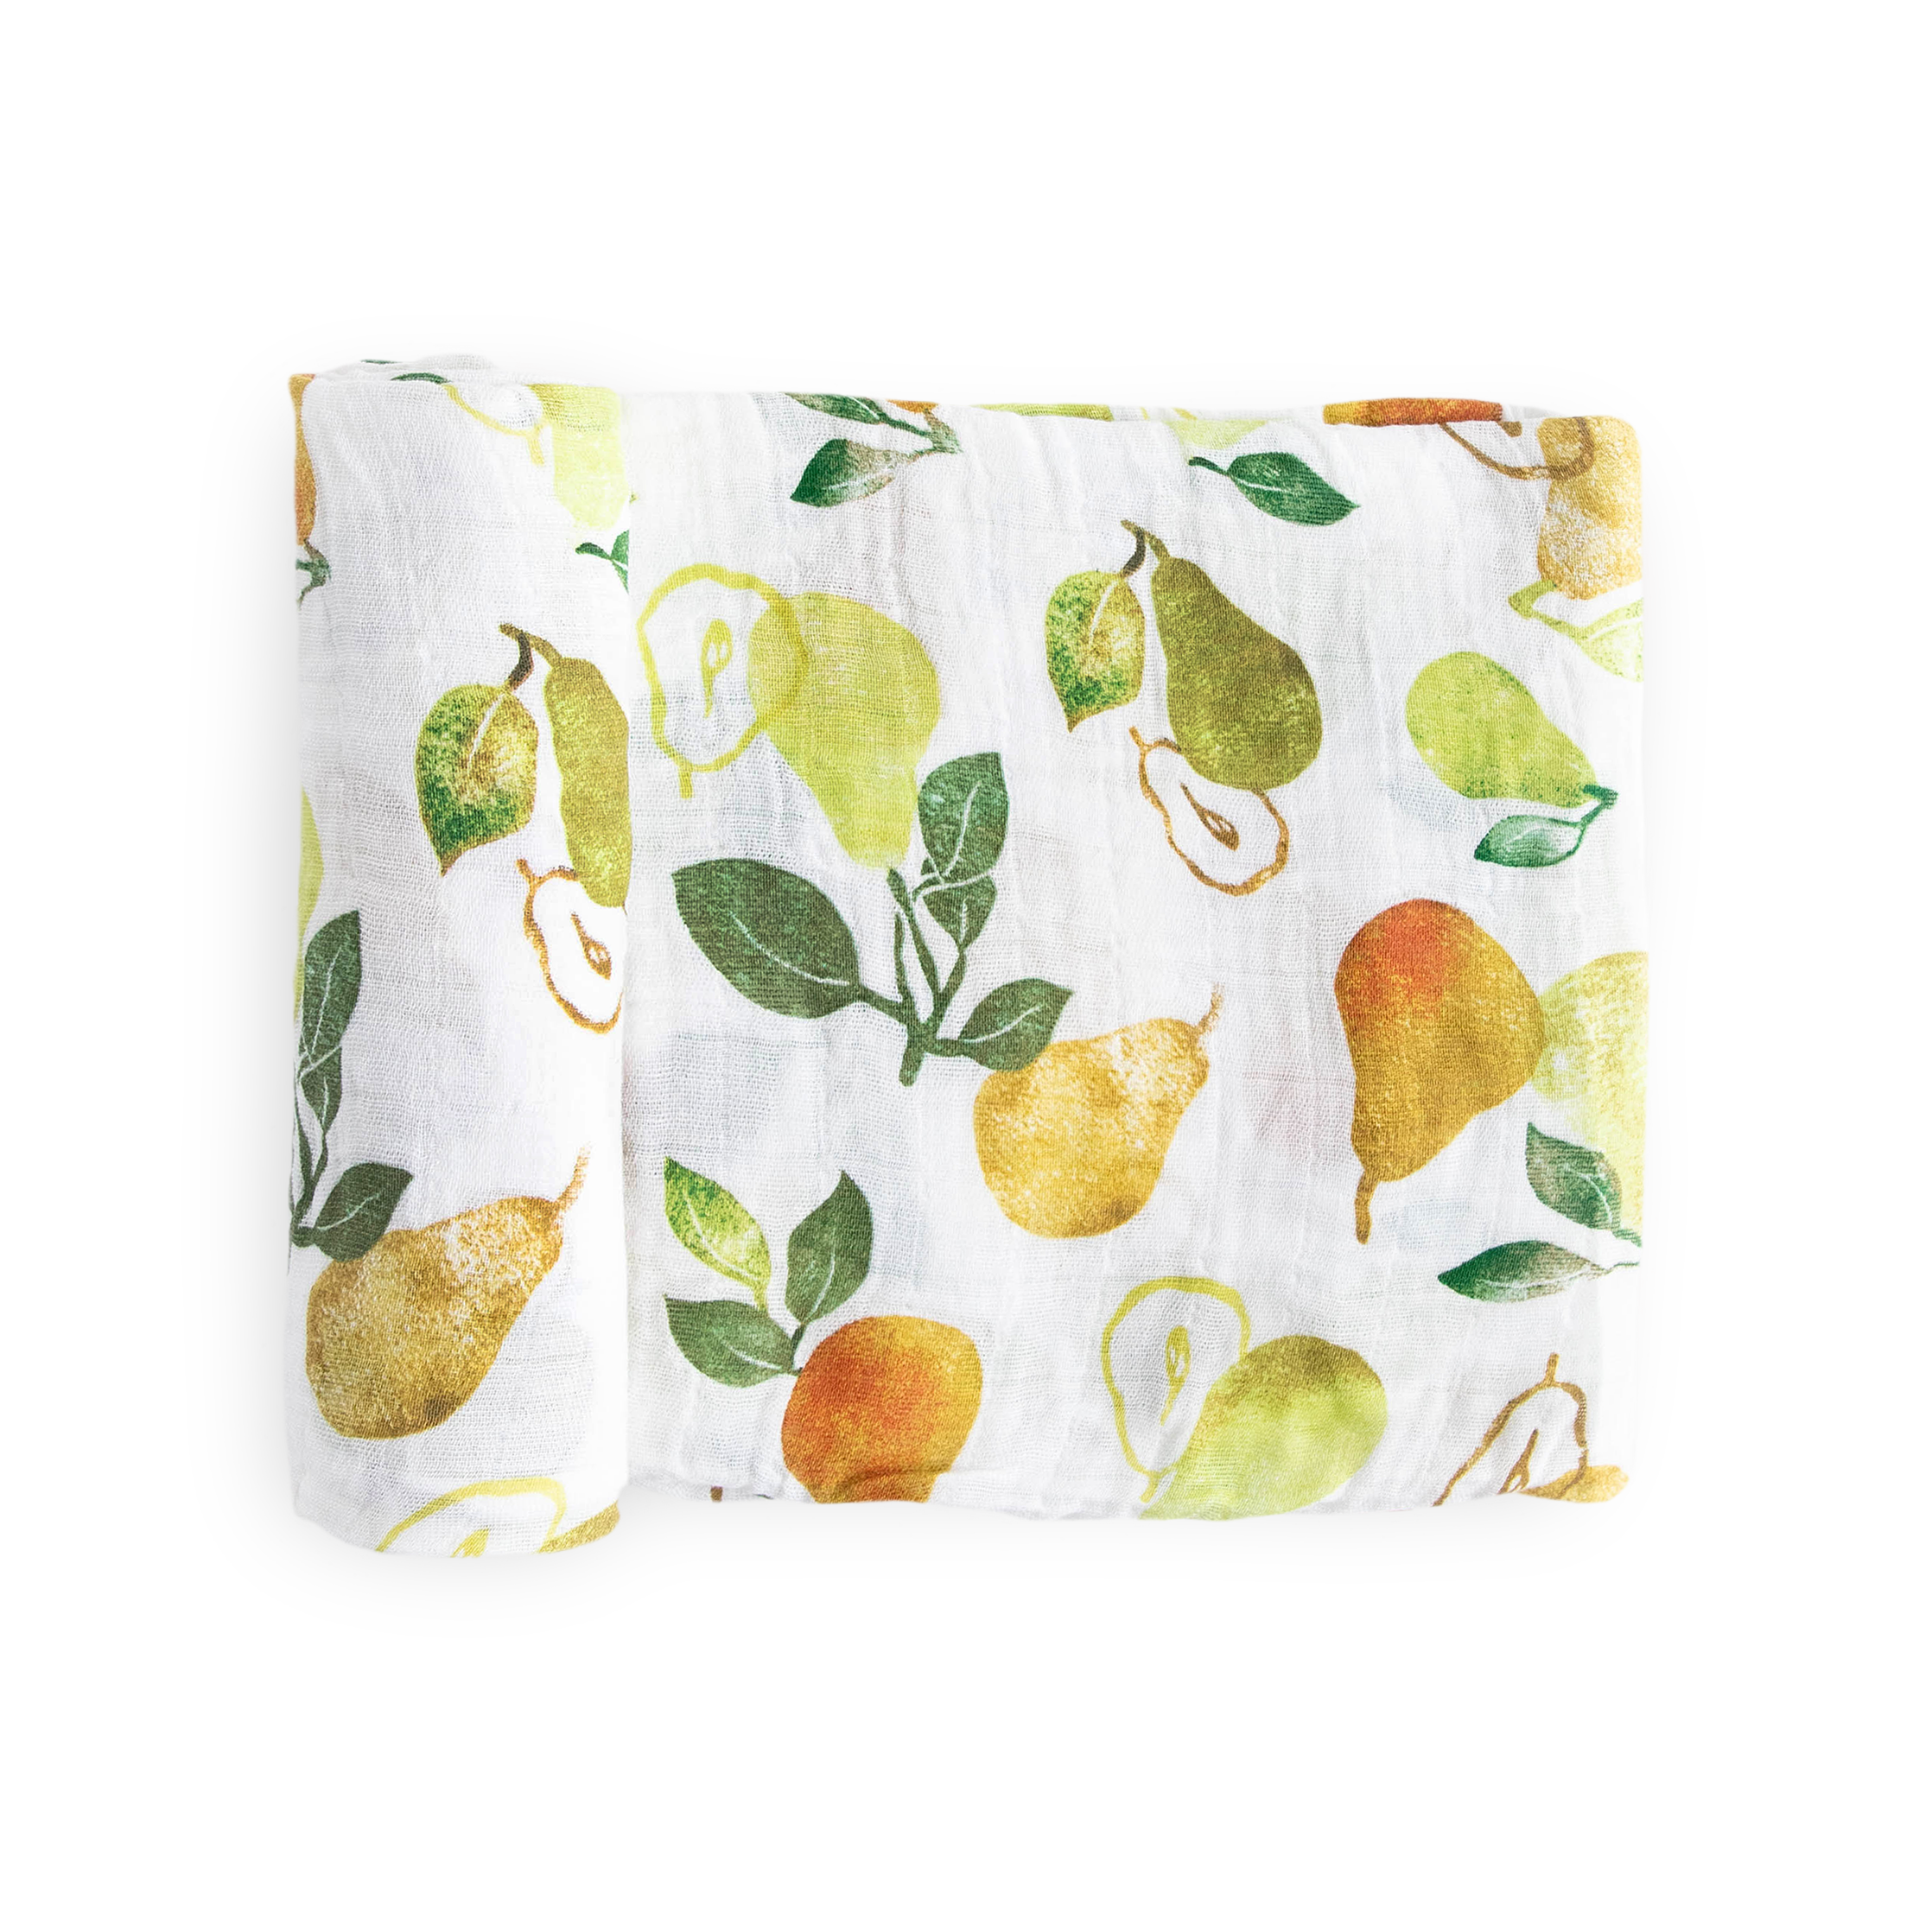 Cotton Muslin Swaddle Blanket - Peary Nice